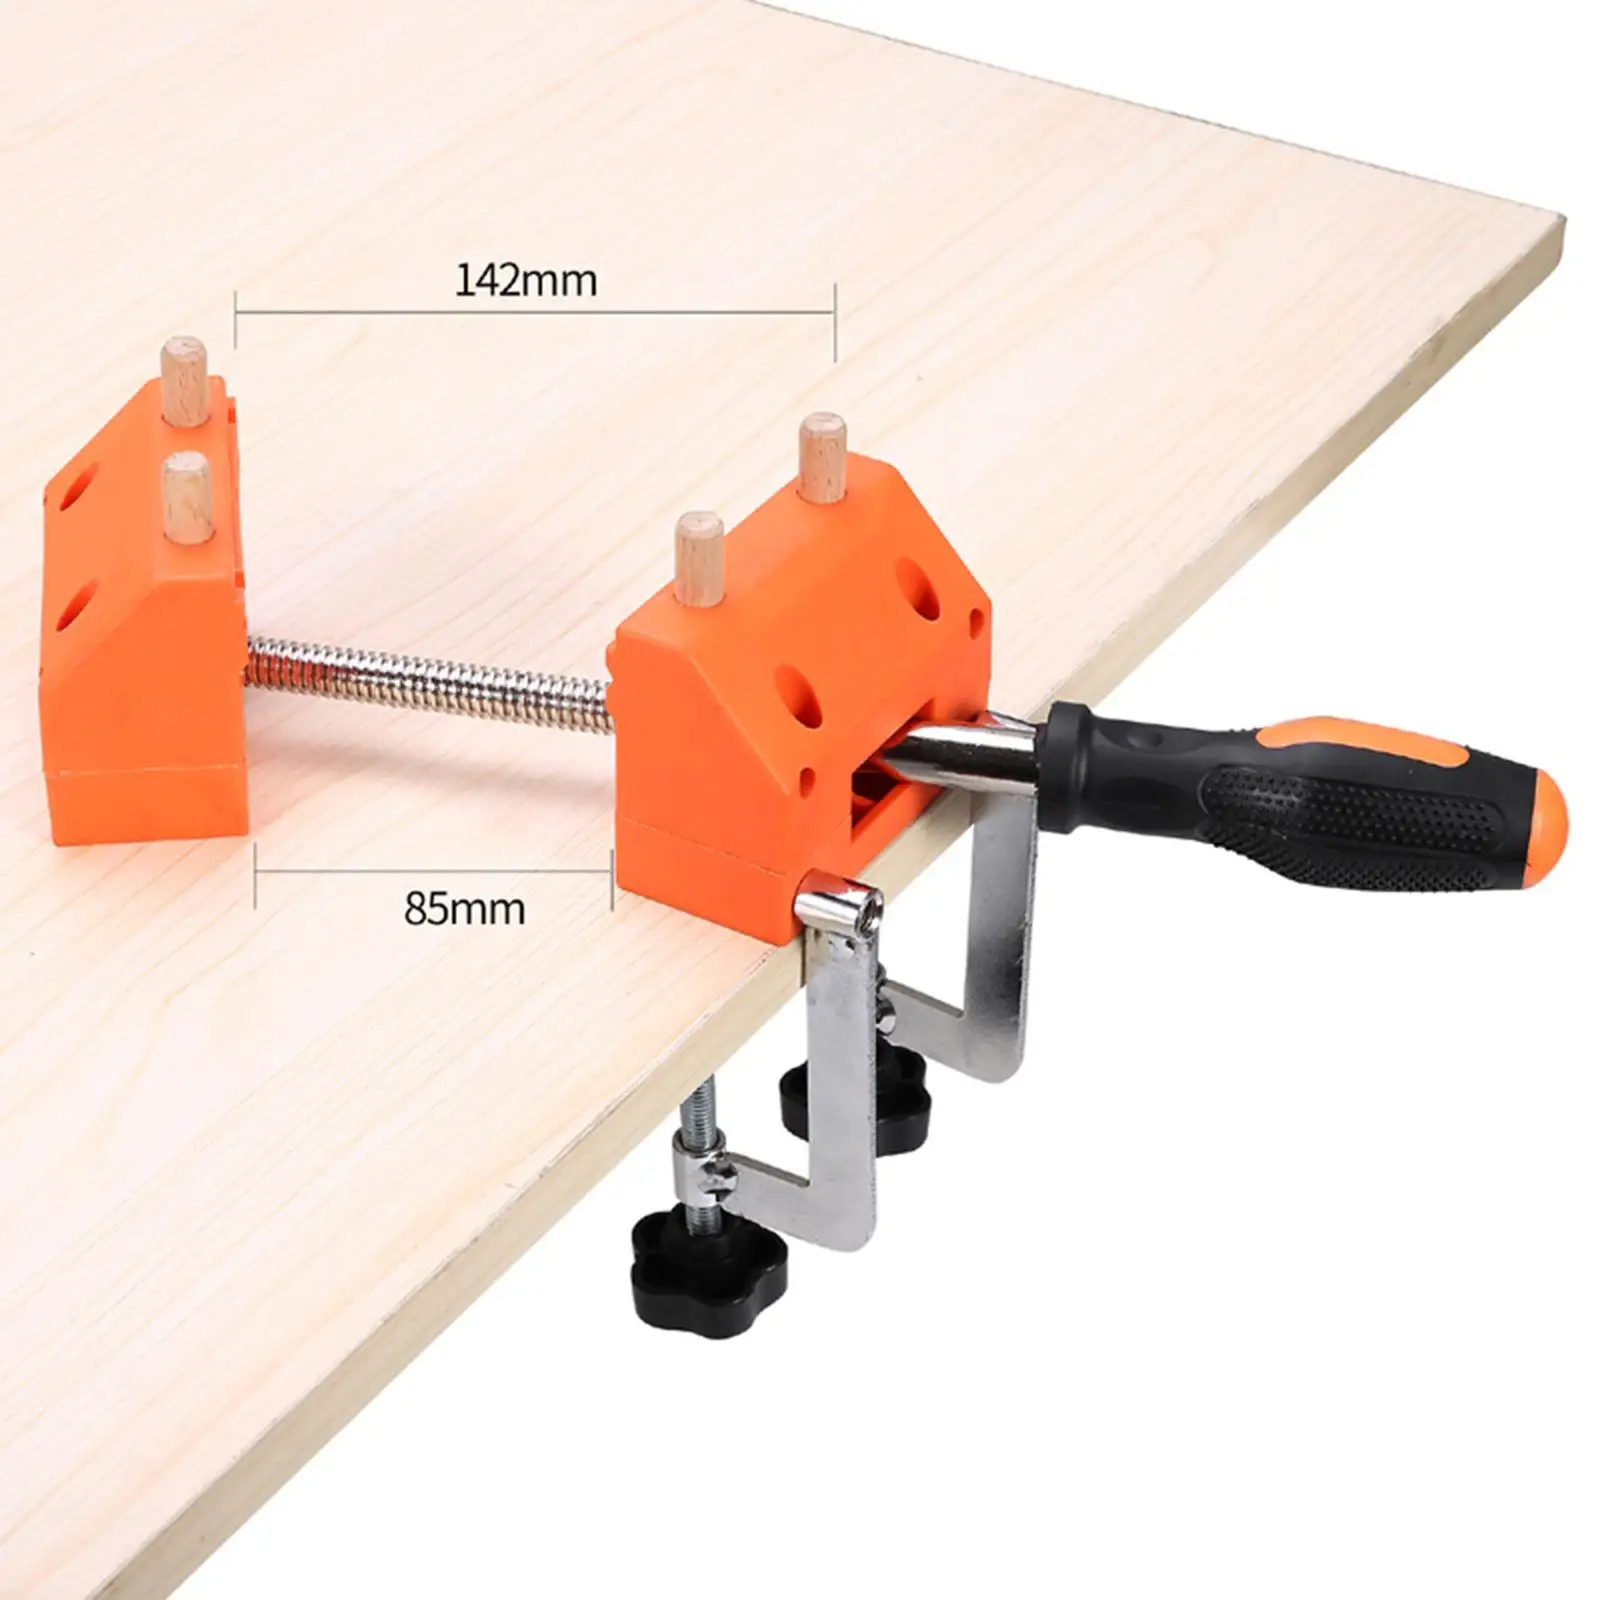 Woodworking Bench Vise Heavy Duty Universal Vise Workbench Vise Table Vise Clamp Home Vice for Home Woodworking Studios Supplies